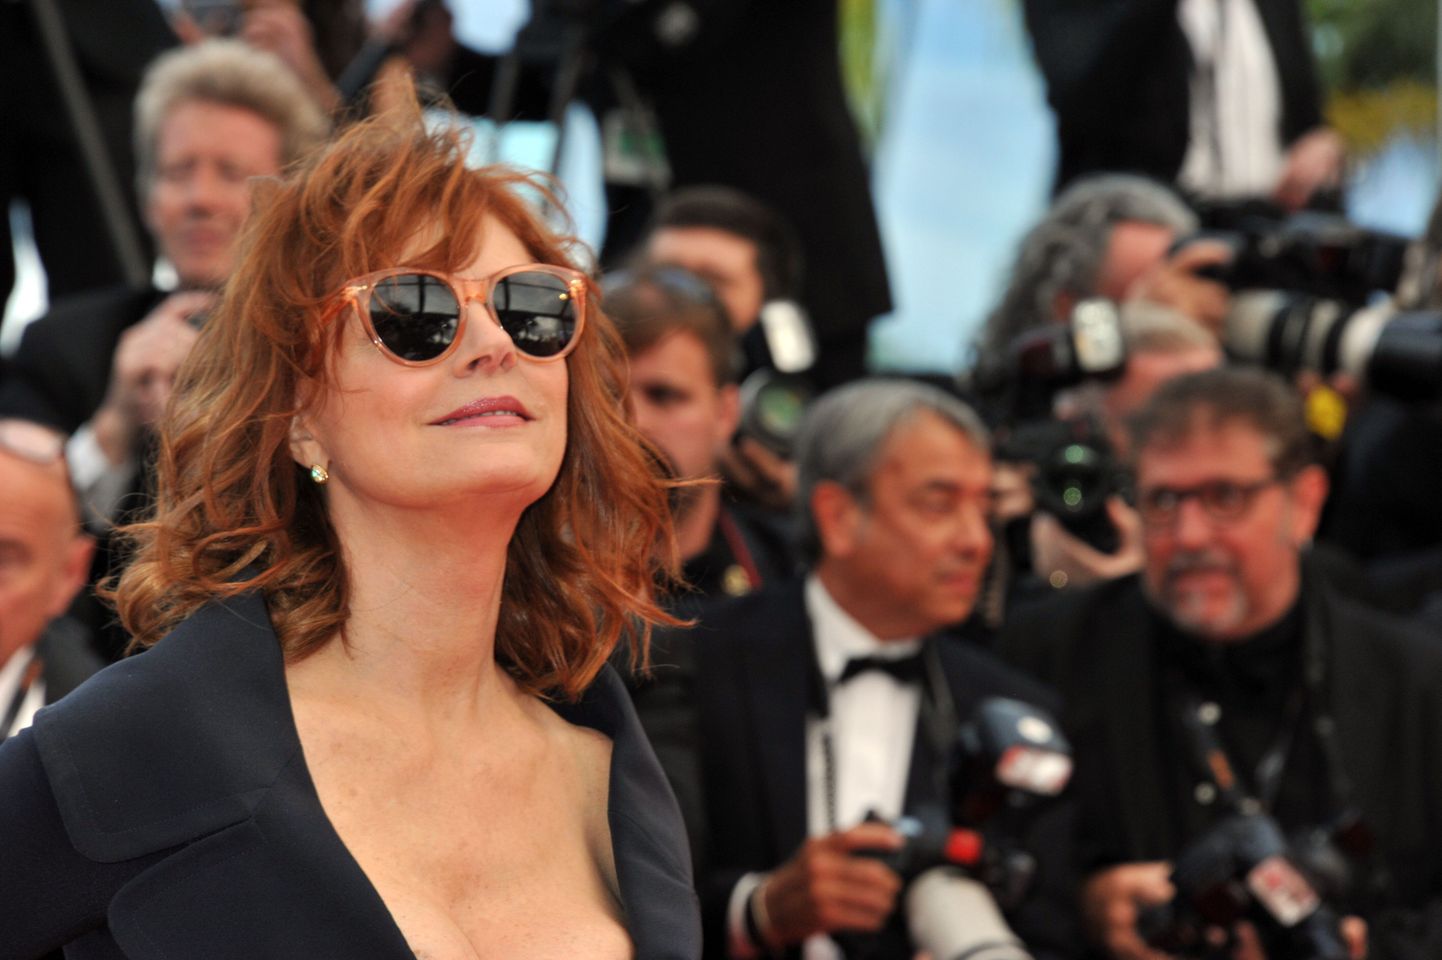 Susan Sarandon attending the Money Monster Premiere, held at the Palais De Festival. Part of the 69th Cannes Film Festival in France.